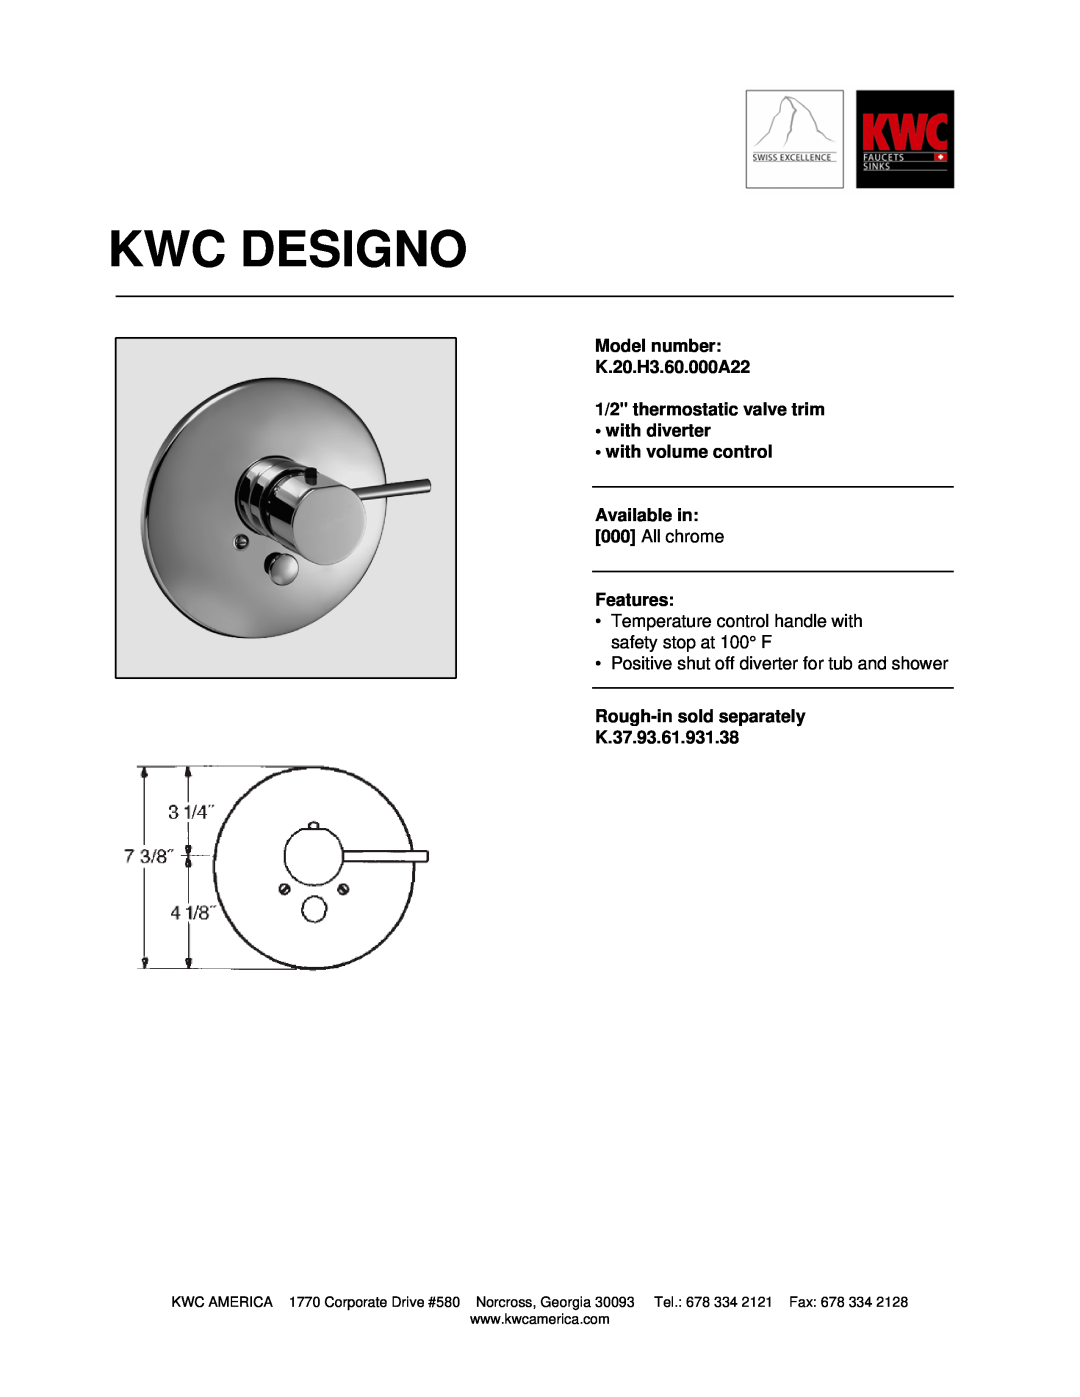 KWC manual Kwc Designo, Model number K.20.H3.60.000A22, 1/2 thermostatic valve trim with diverter, with volume control 